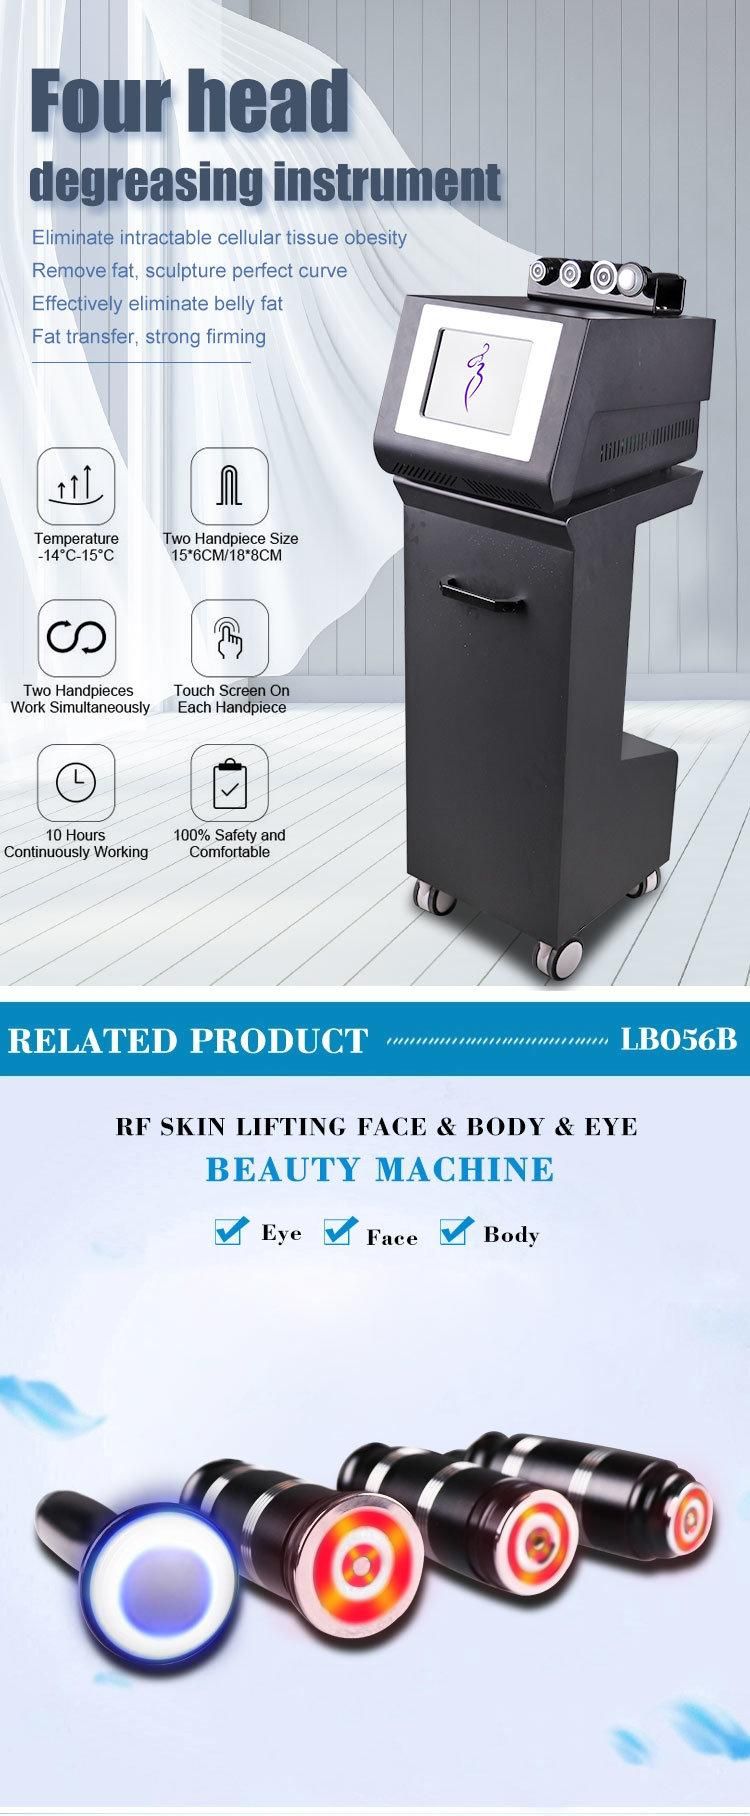 Hot Sale Model Facial Lifting Wrinkle Removal Skin Tightening and Shaping Machine